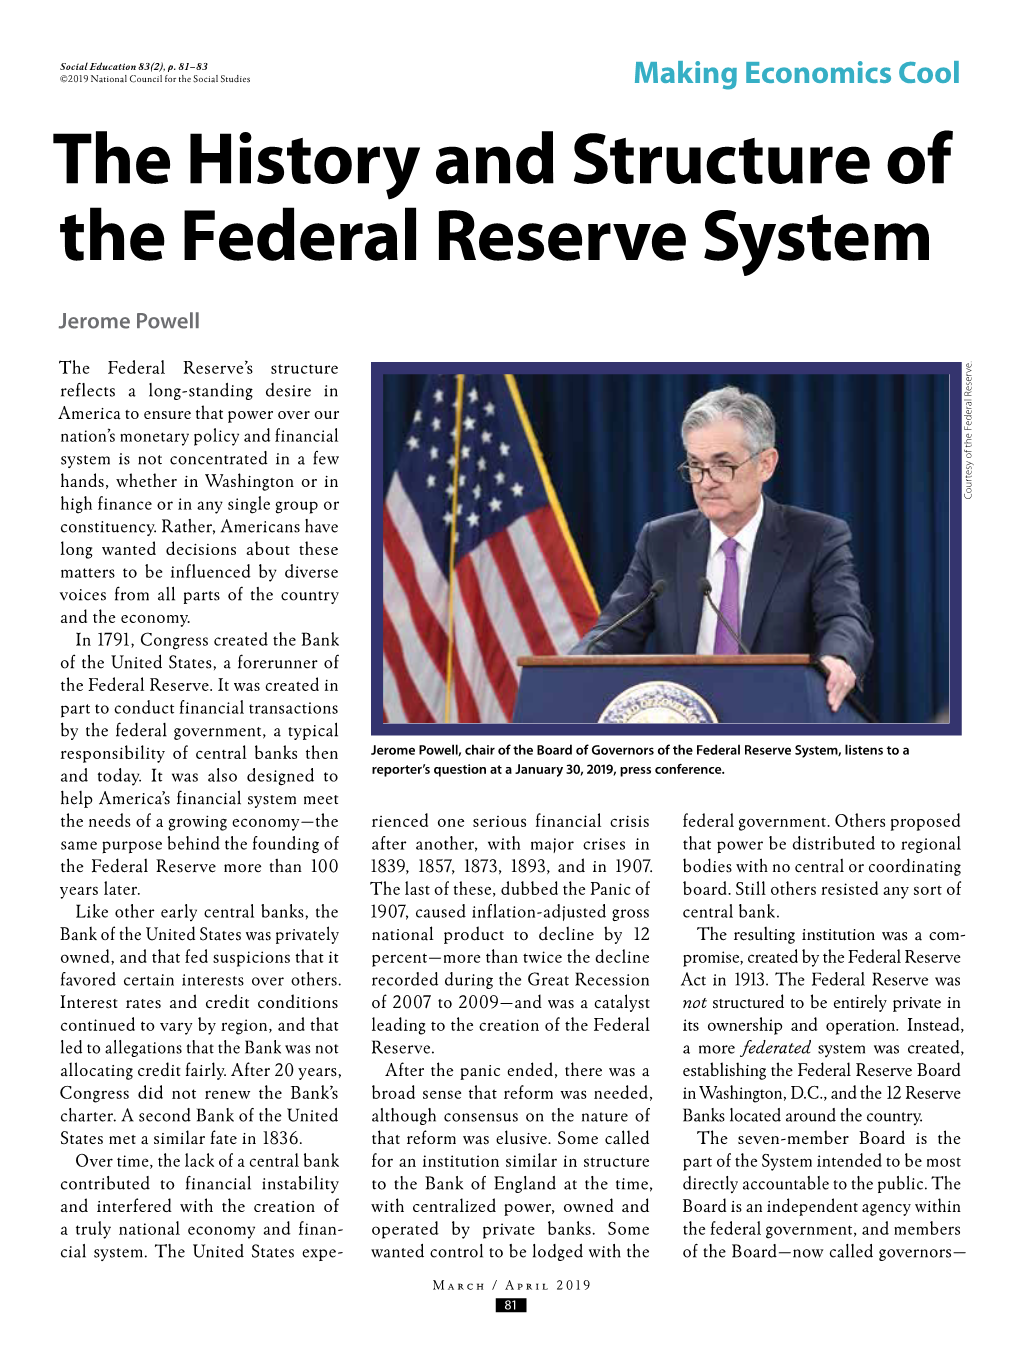 The History and Structure of the Federal Reserve System